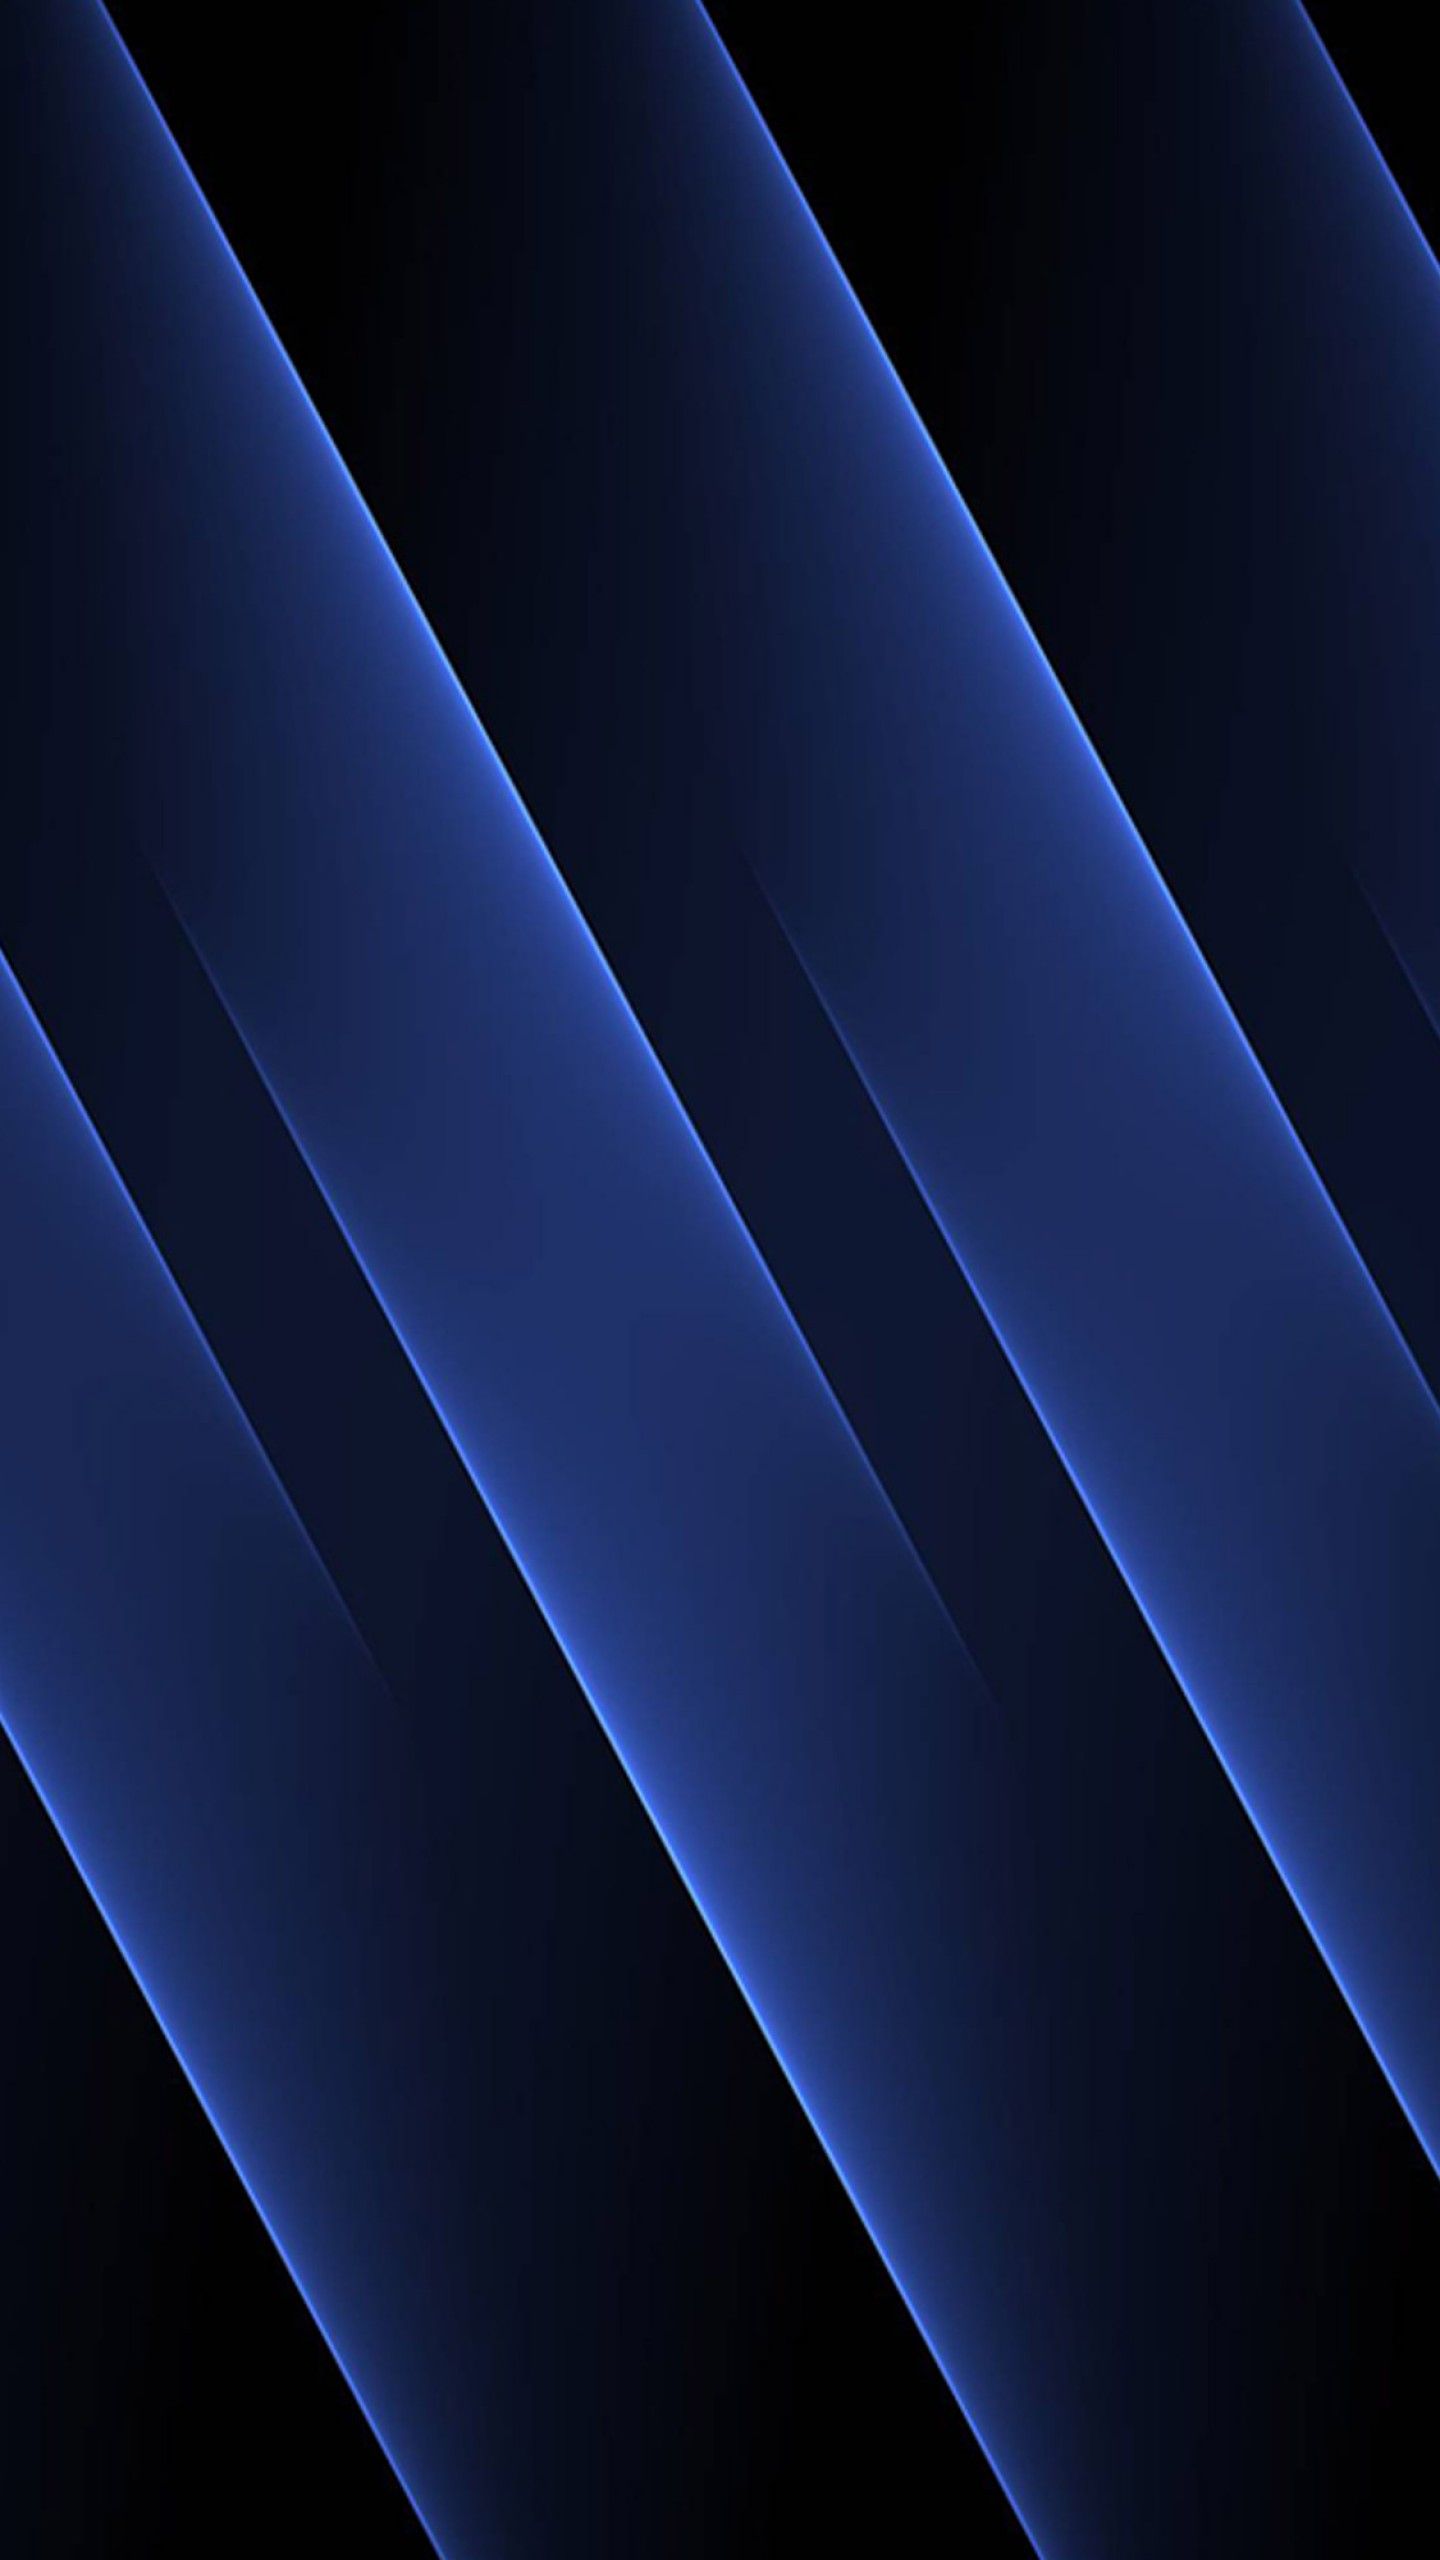 Wallpaper Stripes, Pattern, Blue, Black, HD, Abstract / Editor's Picks,. Wallpaper for iPhone, Android, Mobile and Desktop